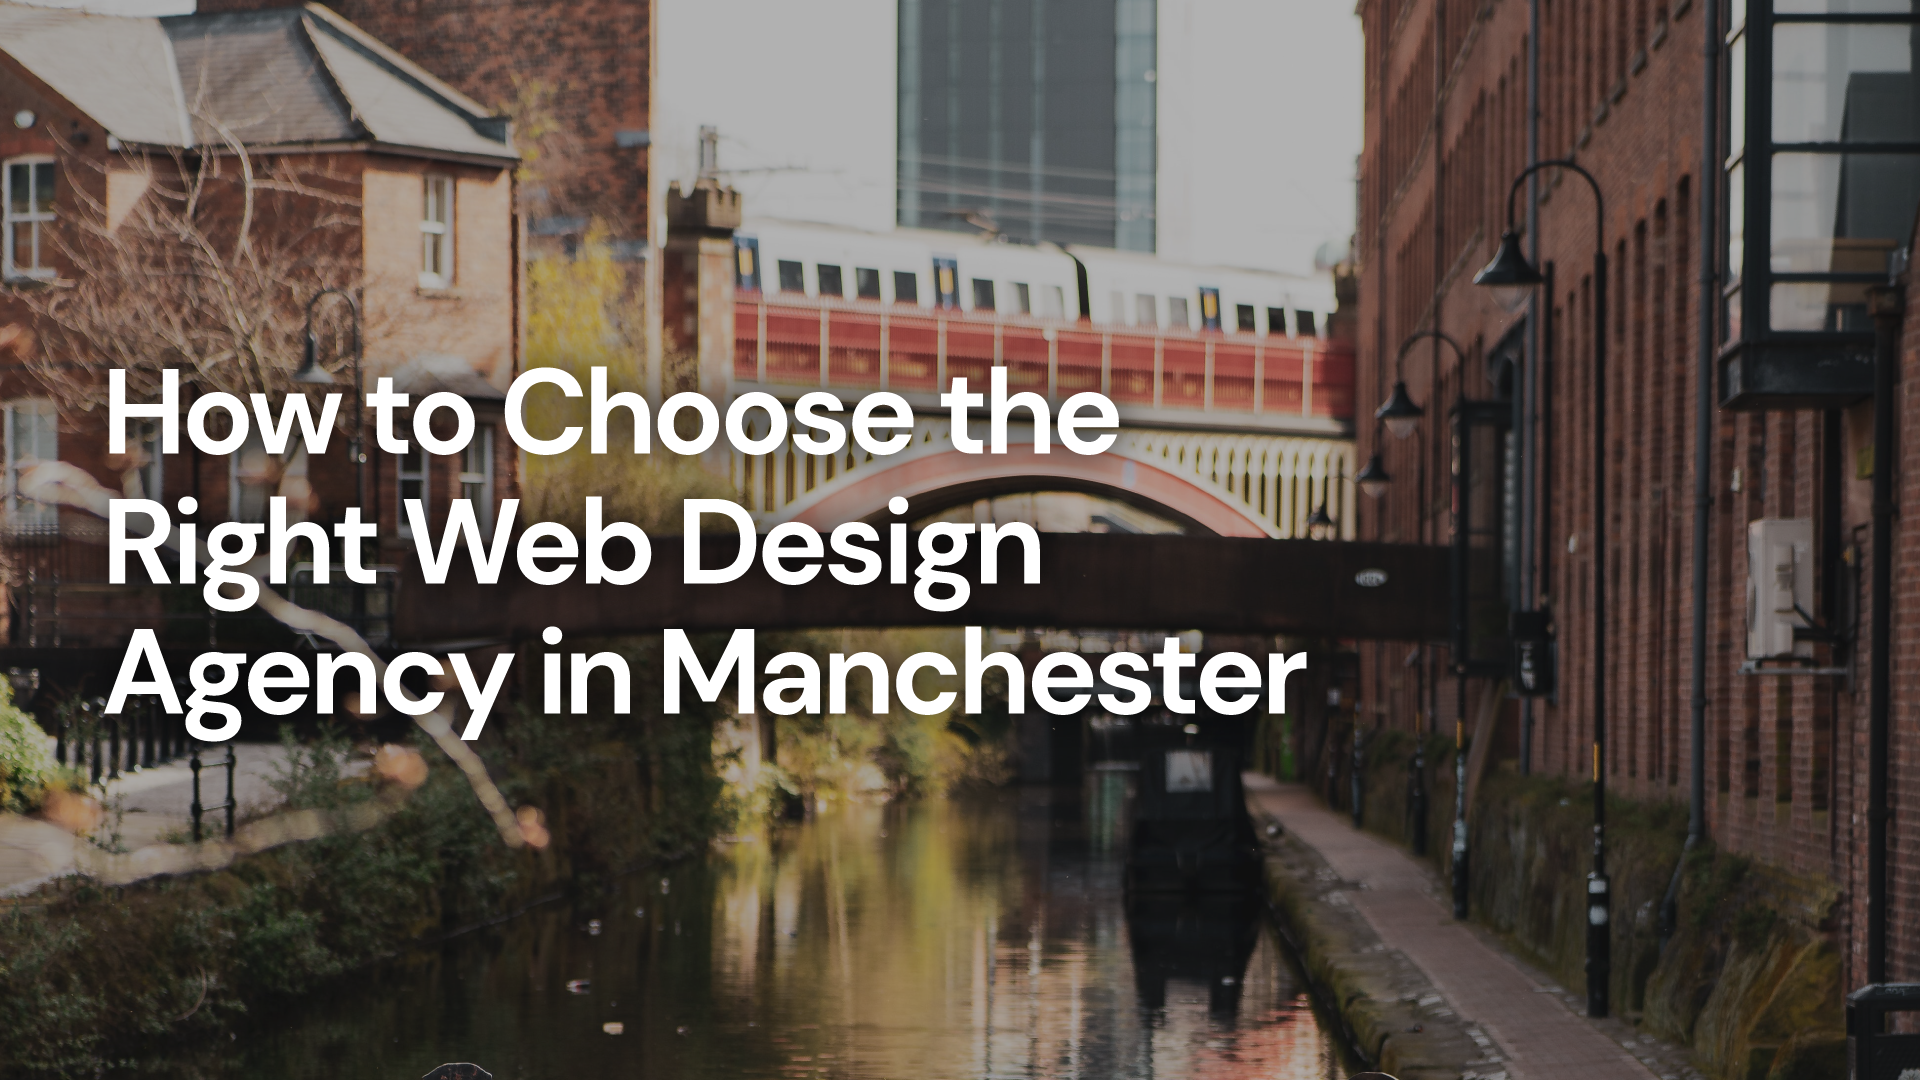 How to Choose the Right Web Design Agency in Manchester